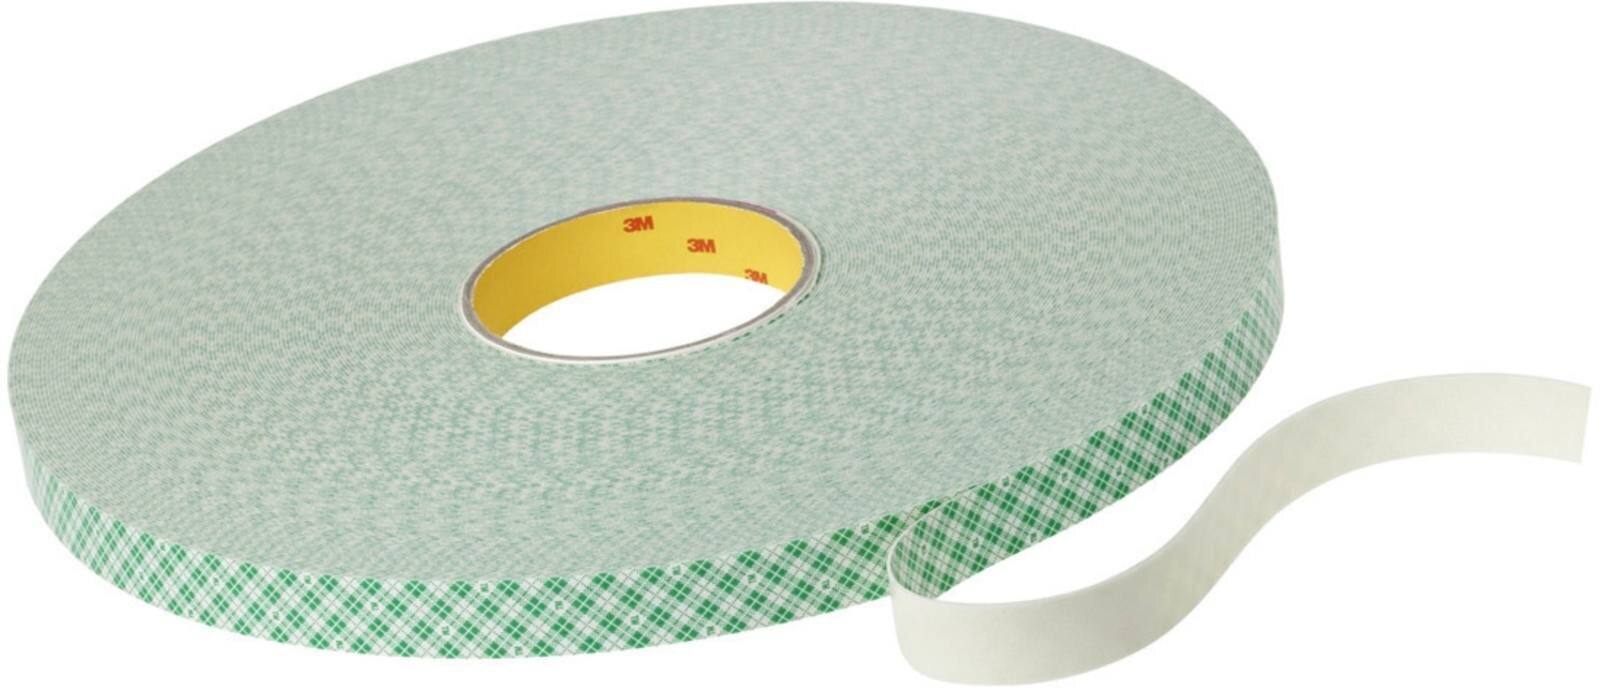 3M PU foam adhesive tape with acrylic adhesive 4032, beige, 25 mm x 66 m, 0.8 mm